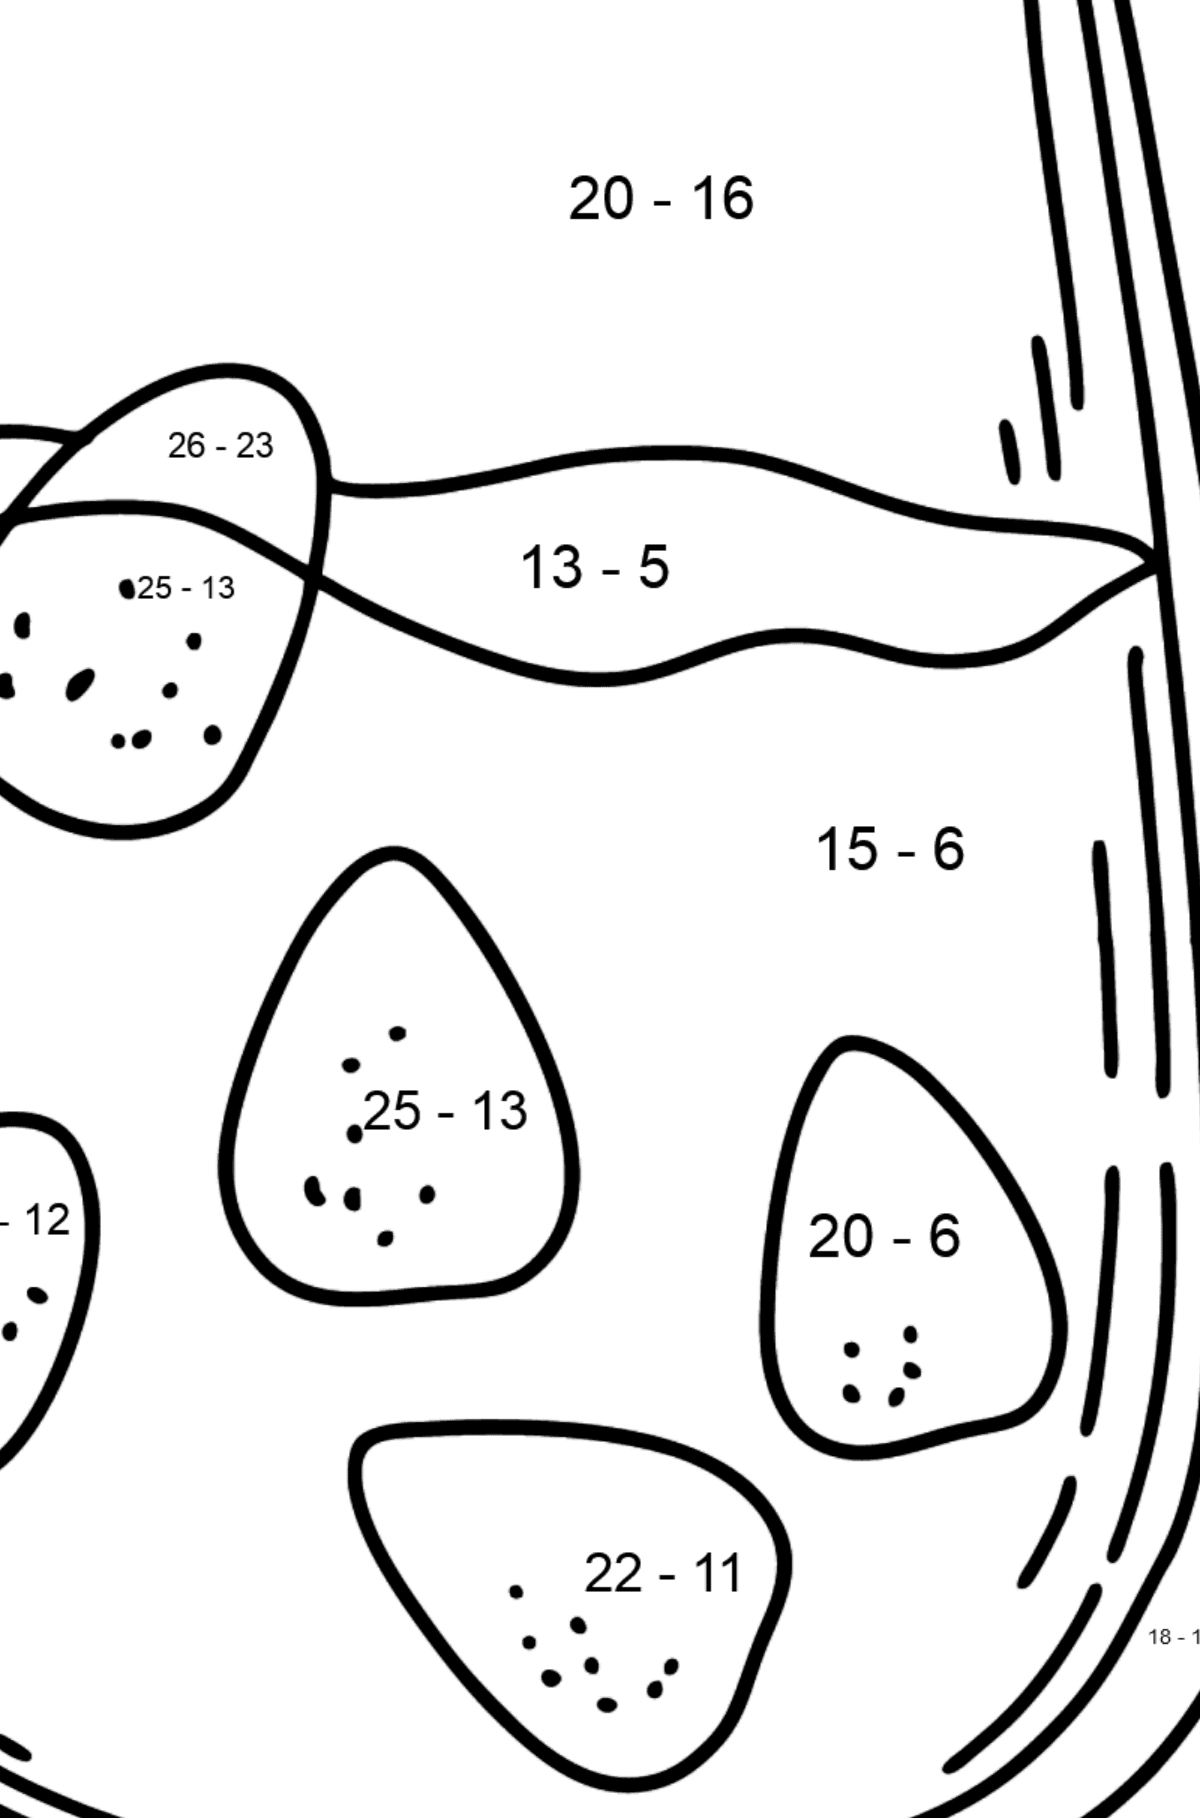 Milk with Berries coloring page - Math Coloring - Subtraction for Kids